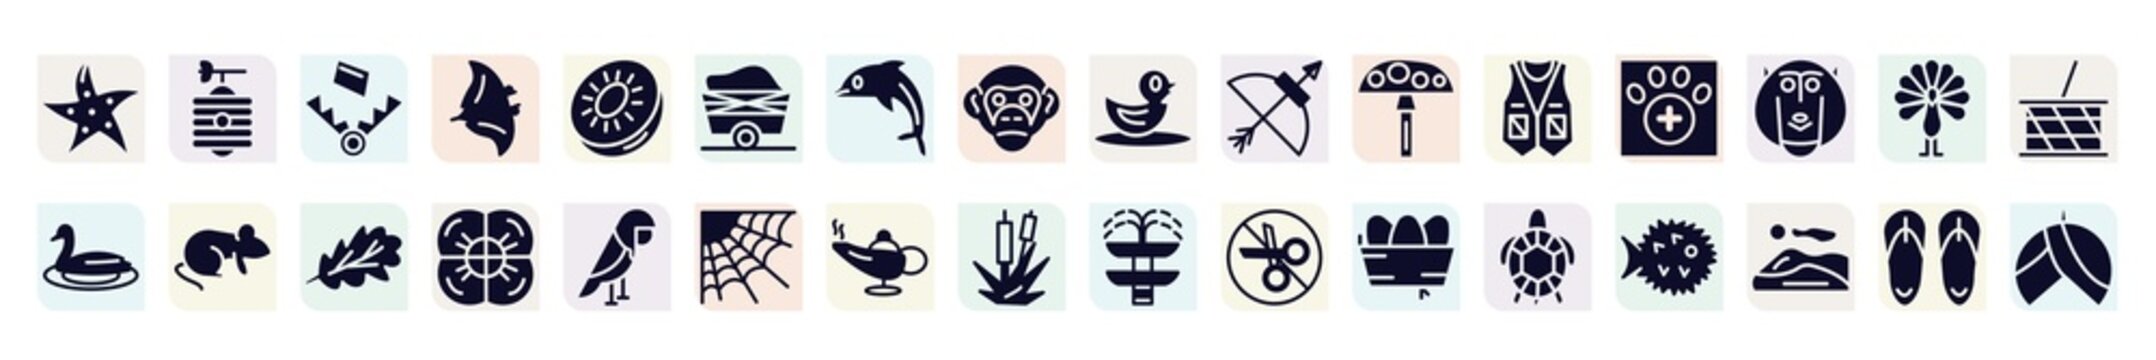 desert filled icons set. glyph icons such as starfish, trap, wagon, bow and arrow, veterinarian, rat, poppy, magic lamp, tortoise icon.